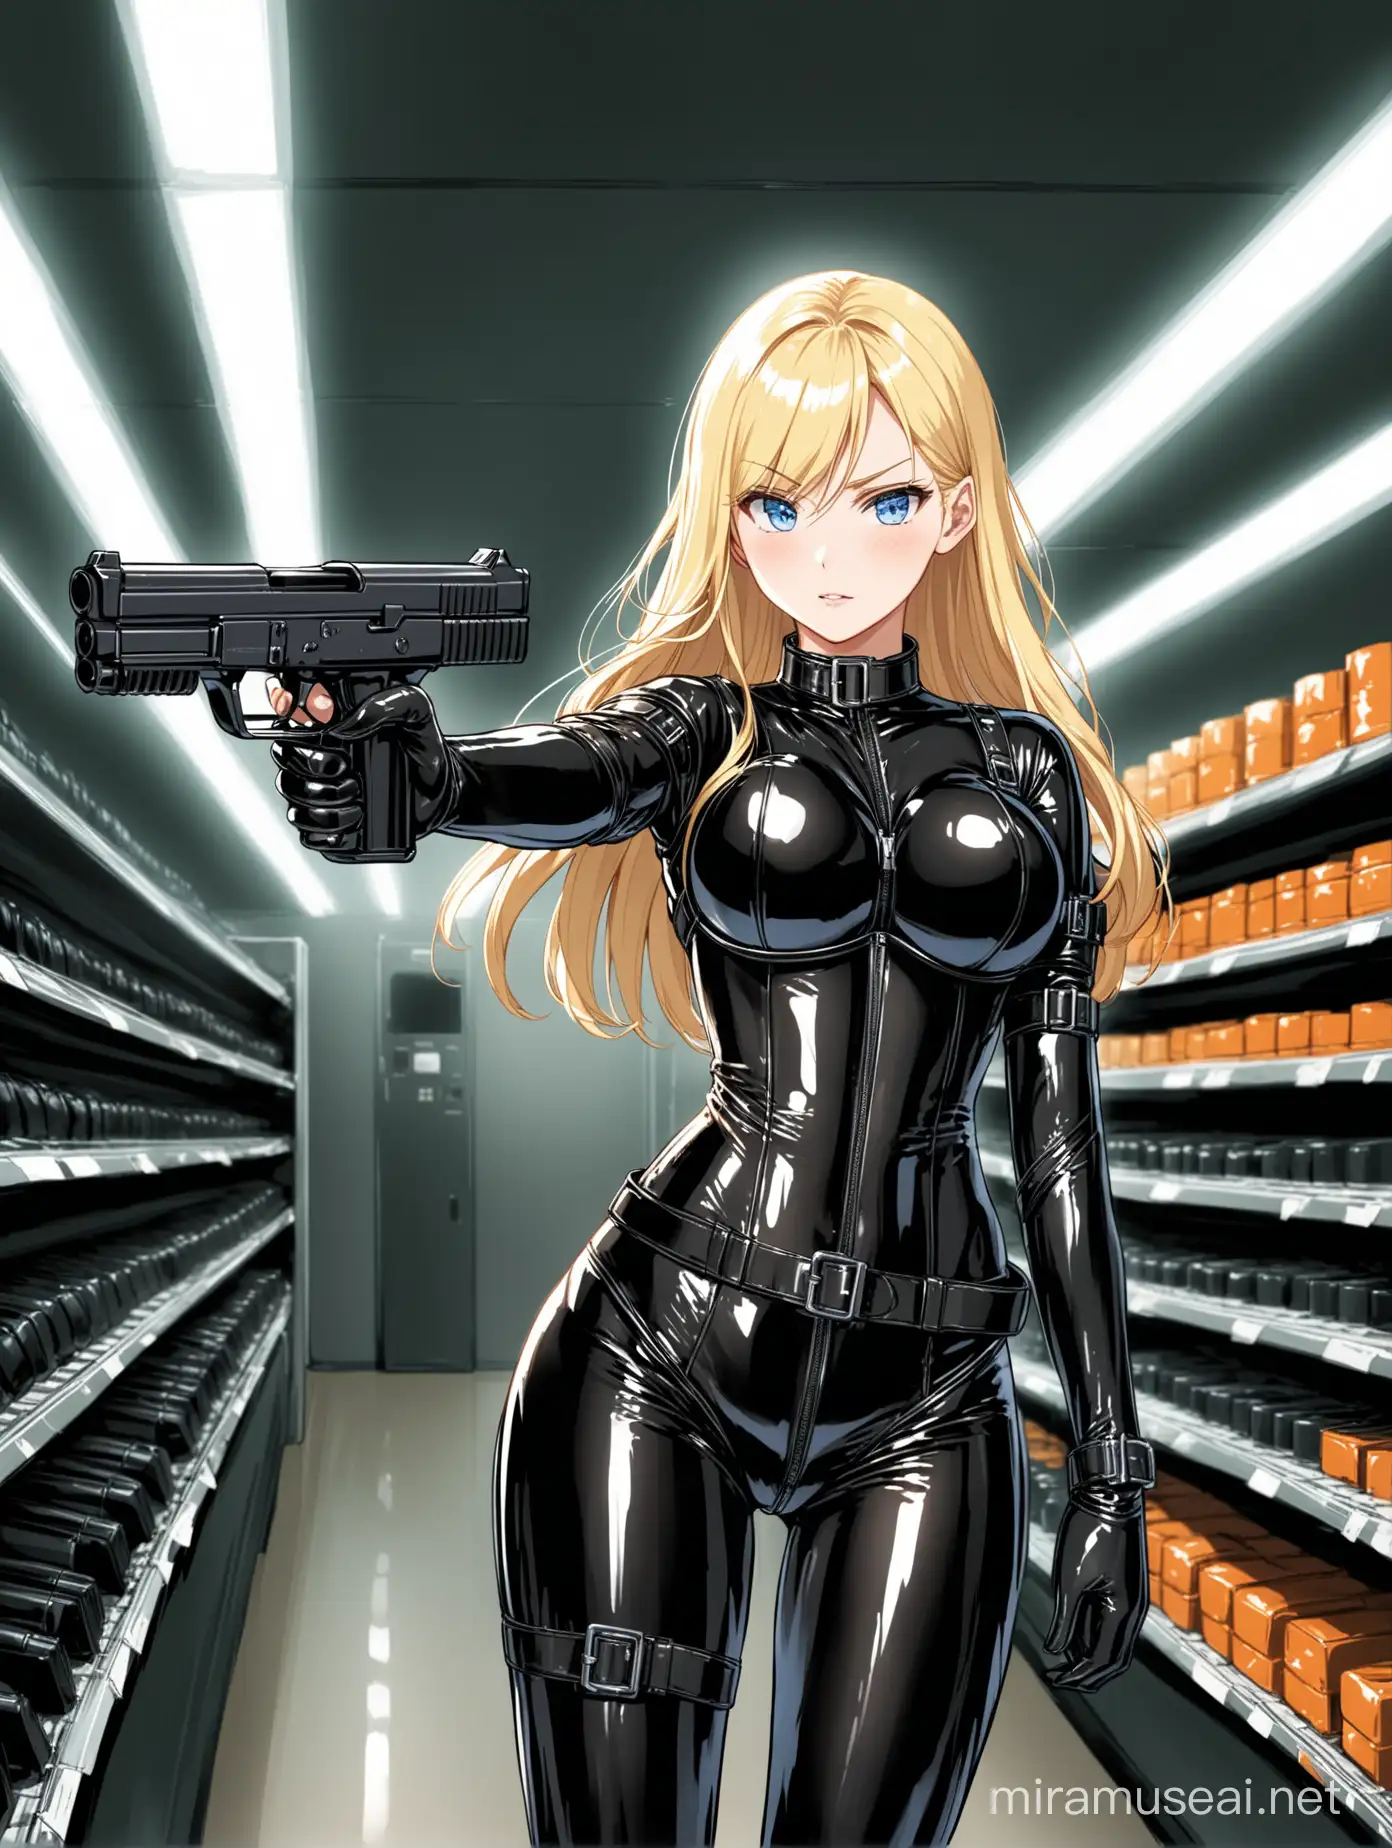 Blond Female Assassin with 9mm Uzi in Convenience Store